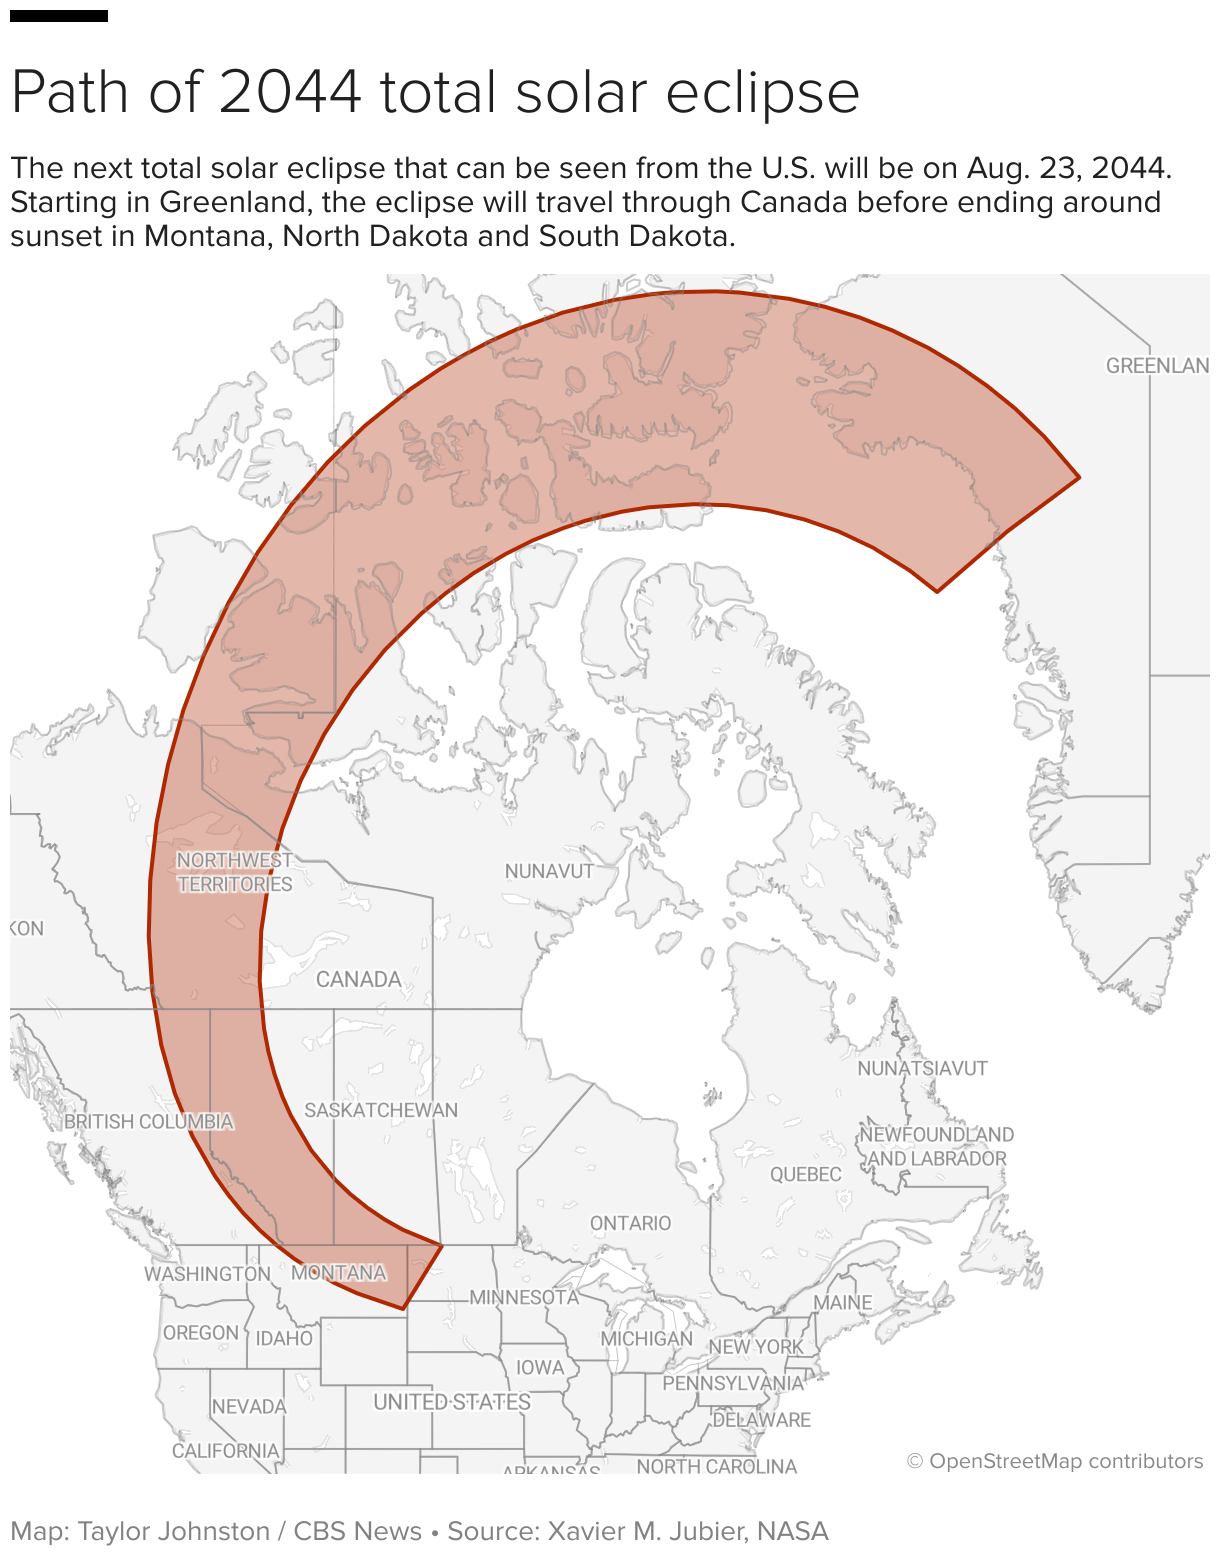 A map showing the path of the 2044 total solar eclipse from Greenland, Canada and parts of the United States.